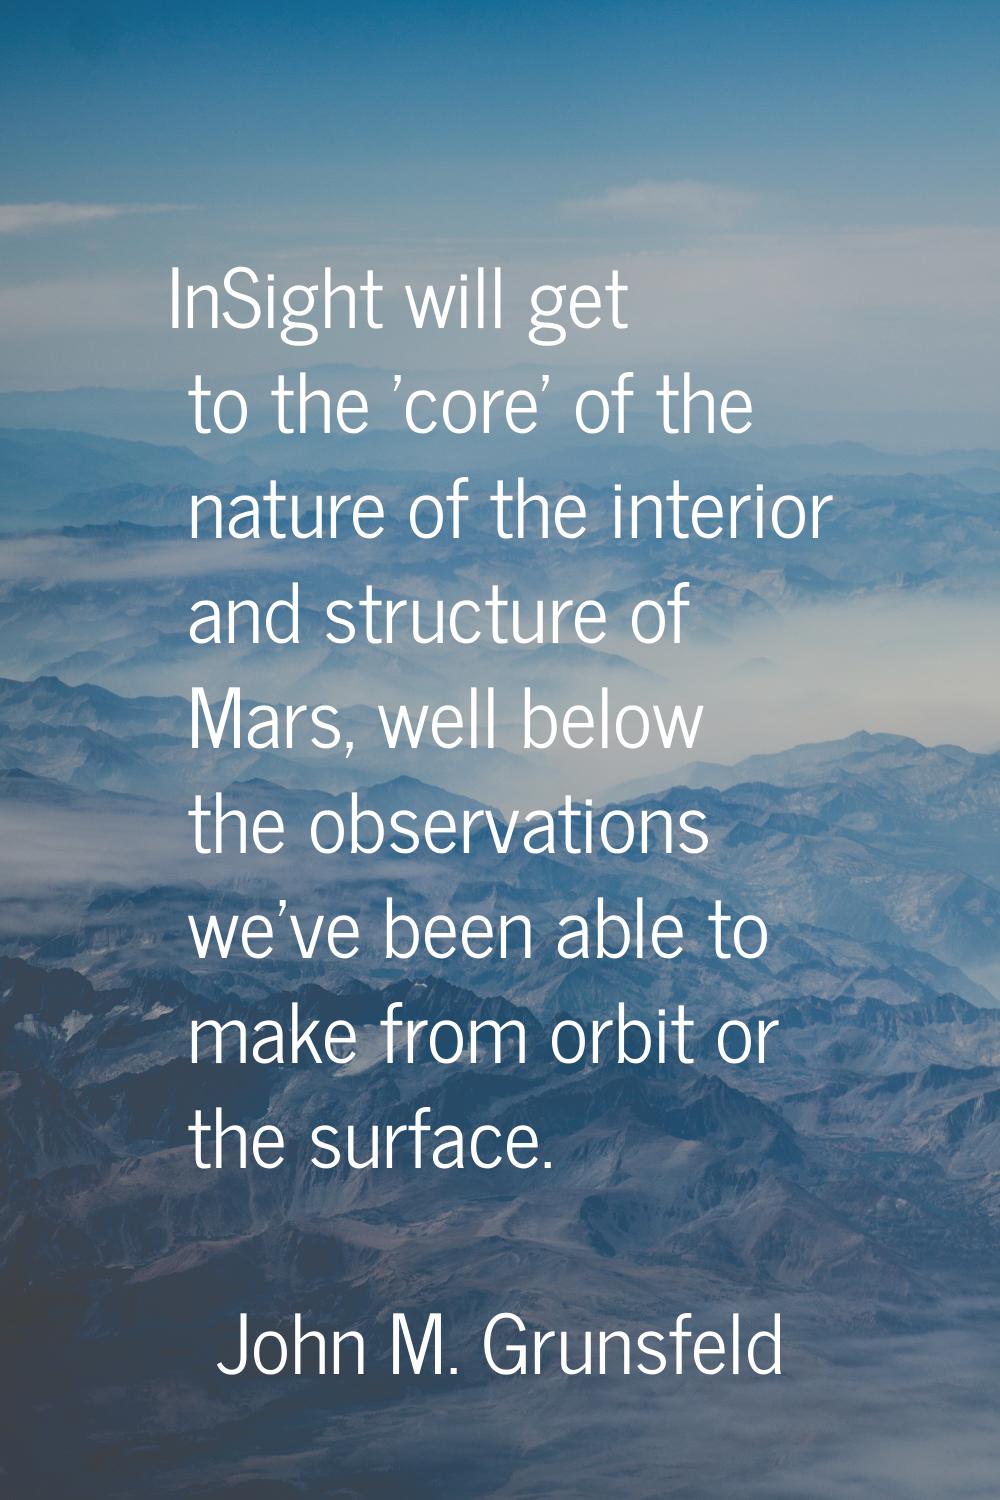 InSight will get to the 'core' of the nature of the interior and structure of Mars, well below the 